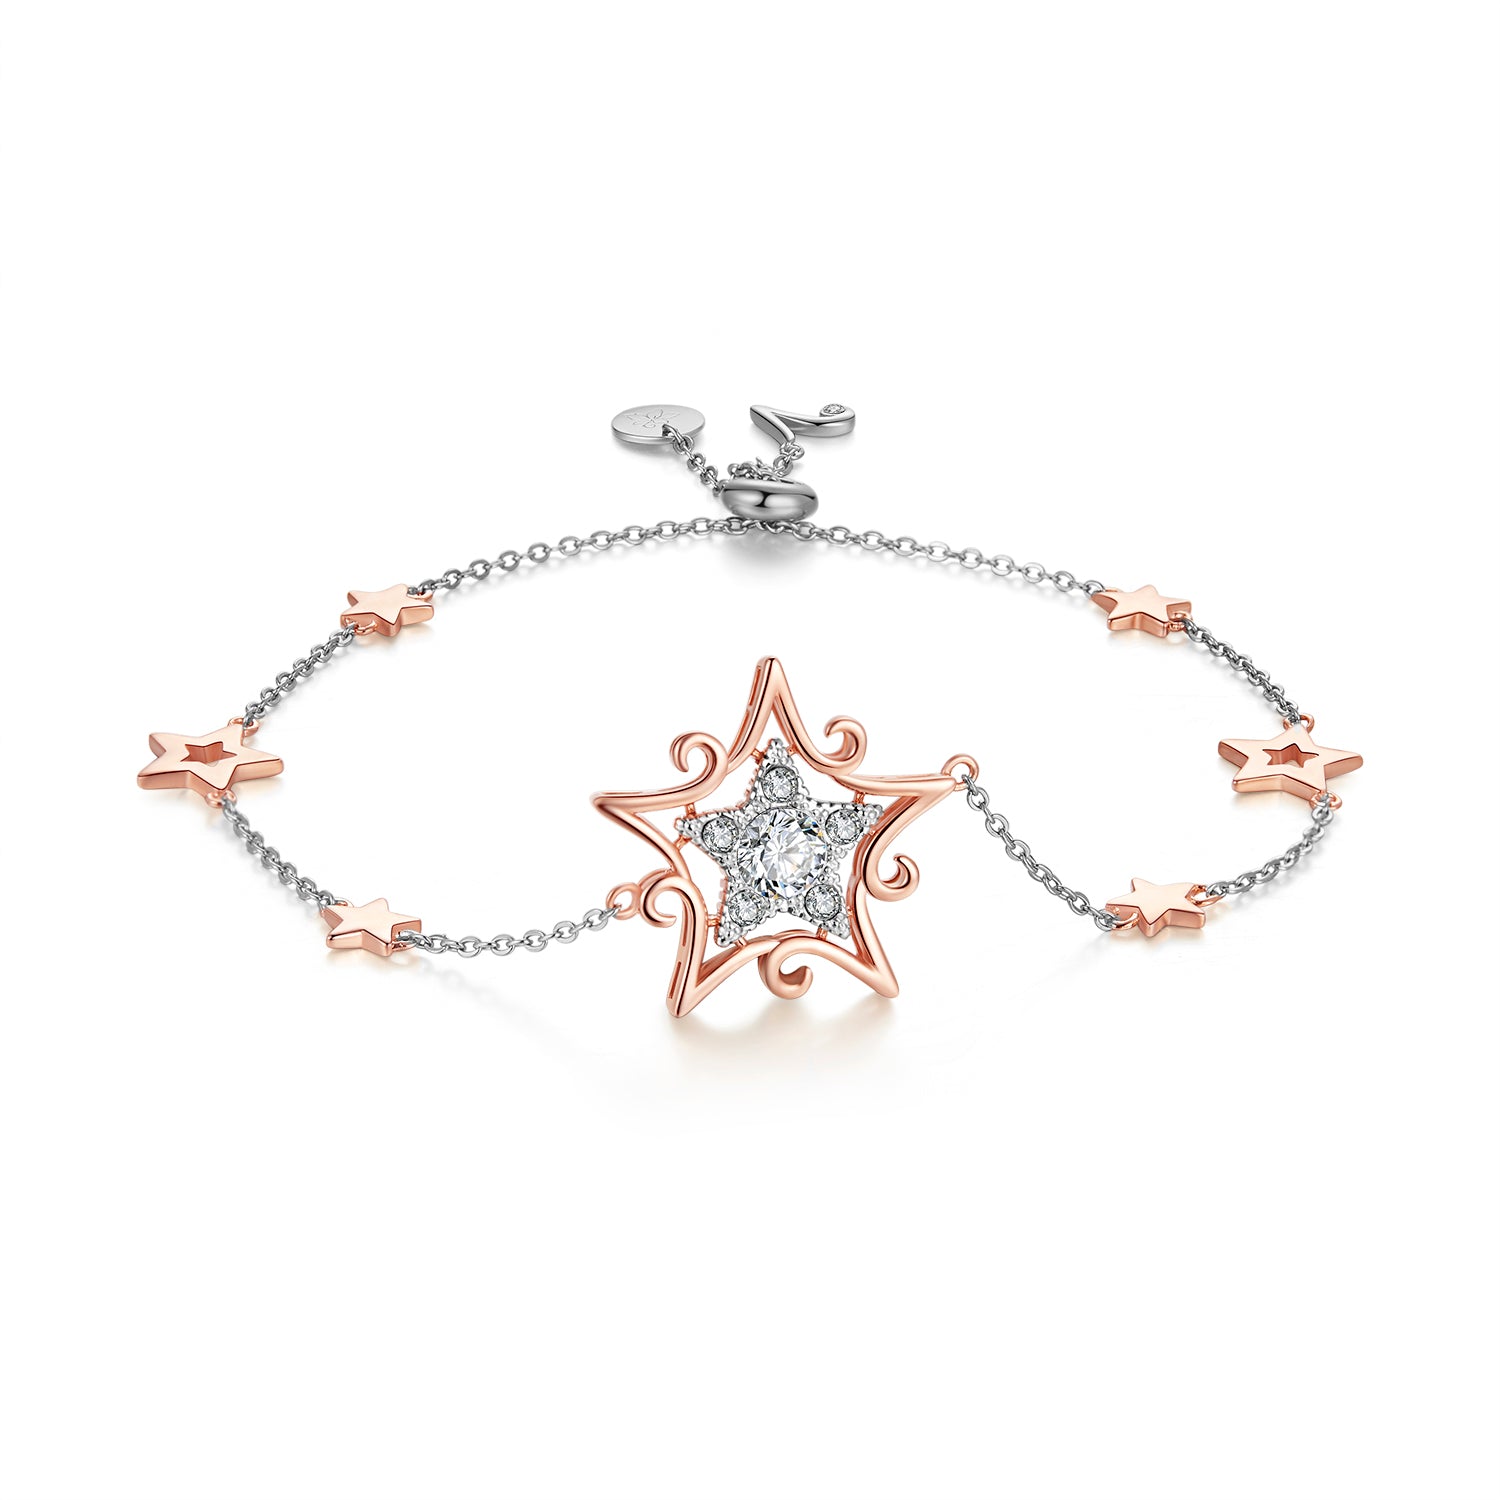 Star Glow 925 silver with rose gold plating crystal bracelet